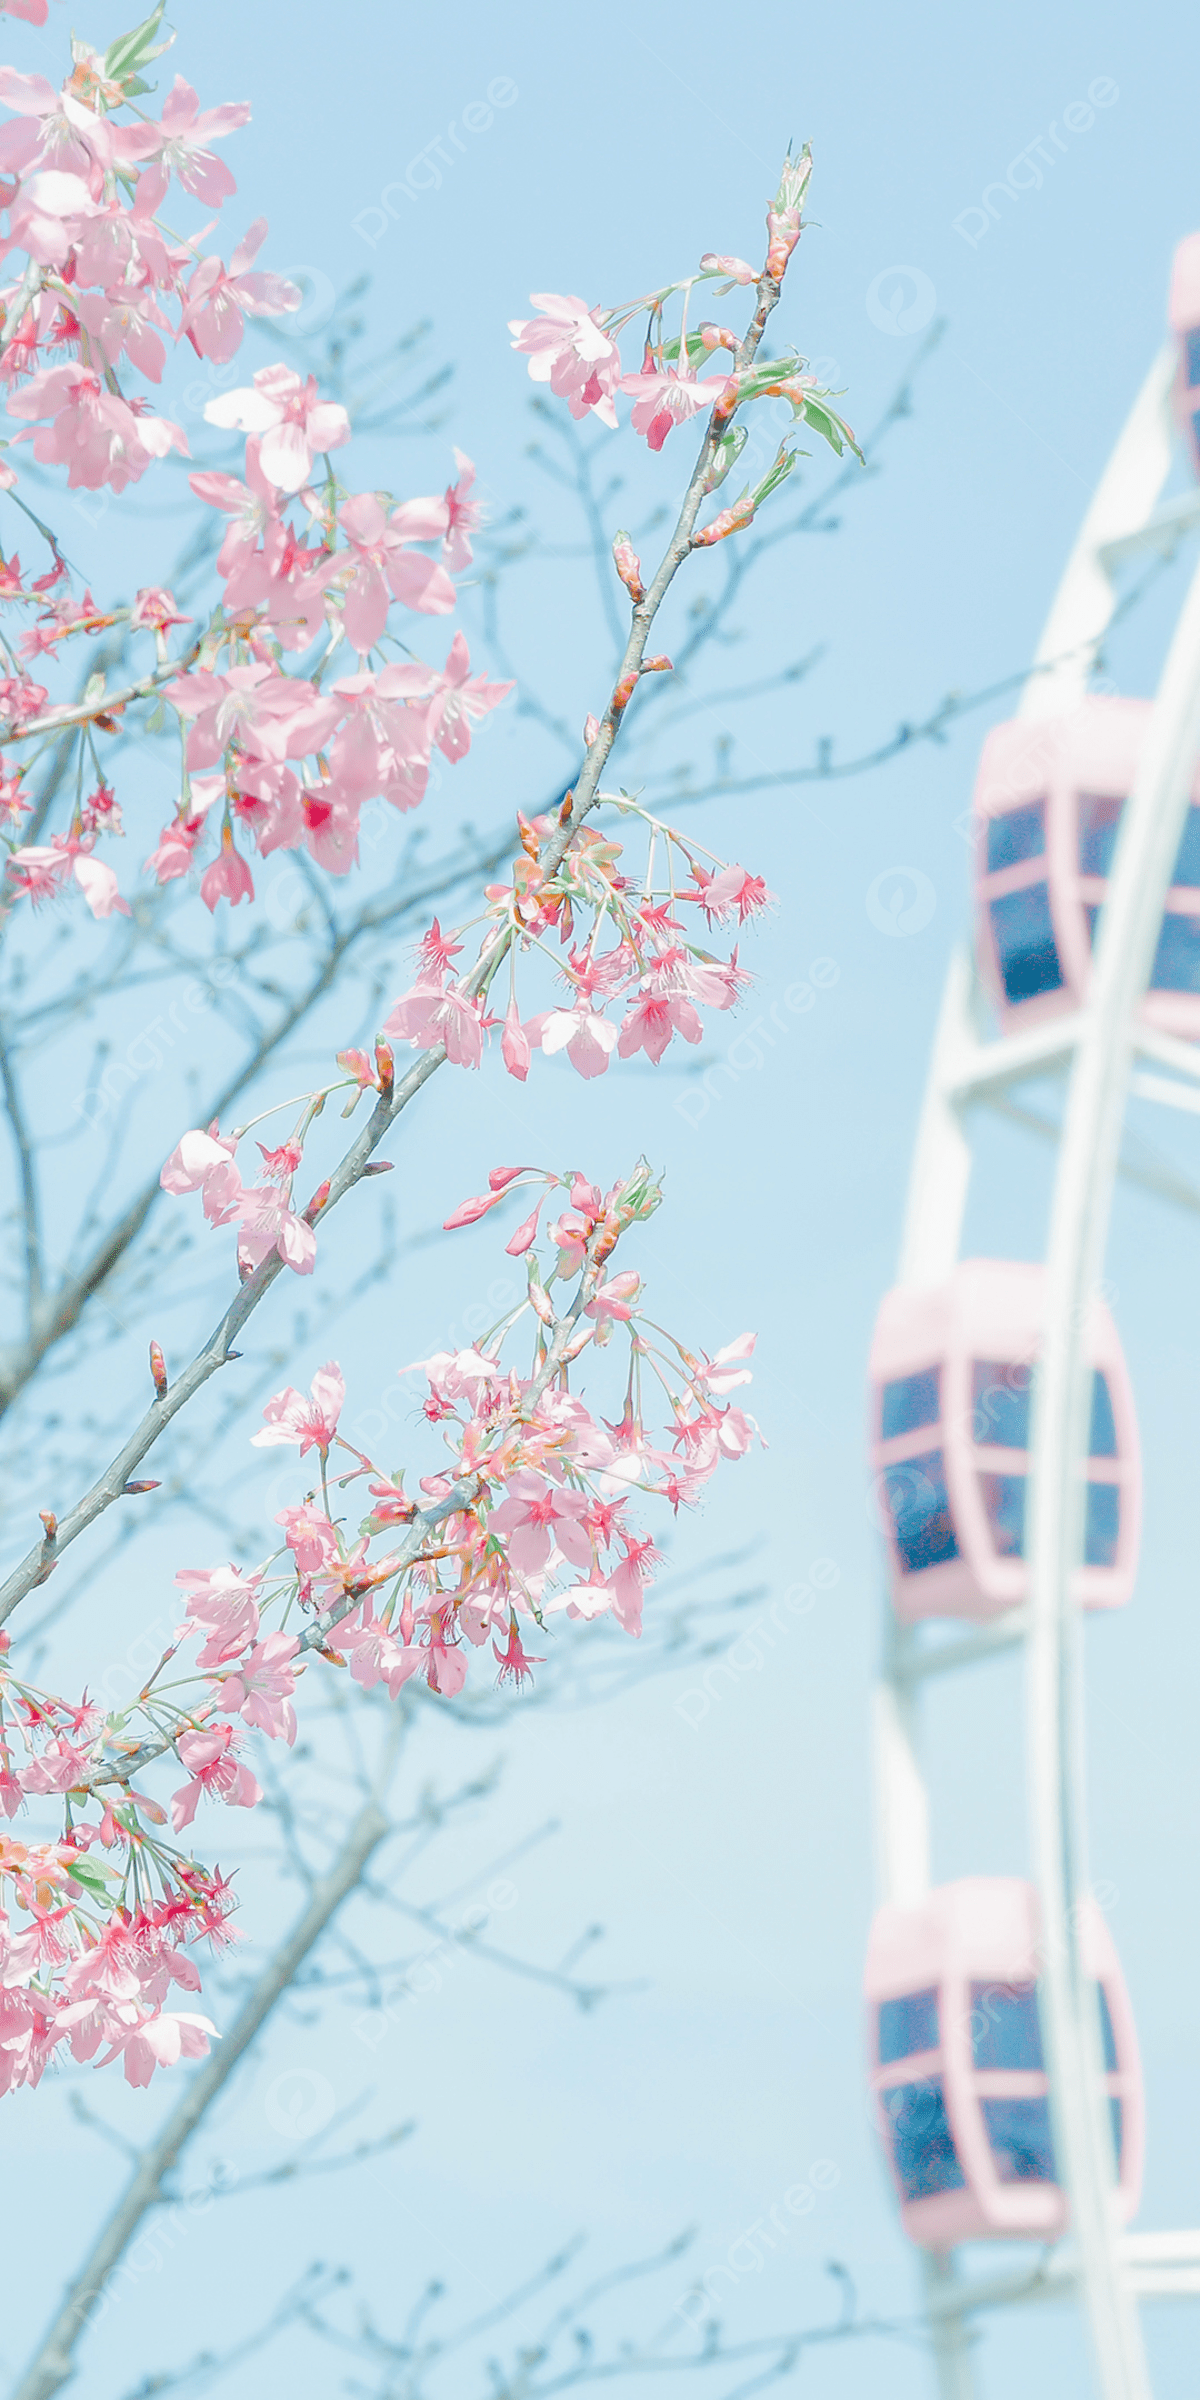 A pink cherry blossom branch in front of a blue sky and a pink and white Ferris wheel. - Cherry blossom